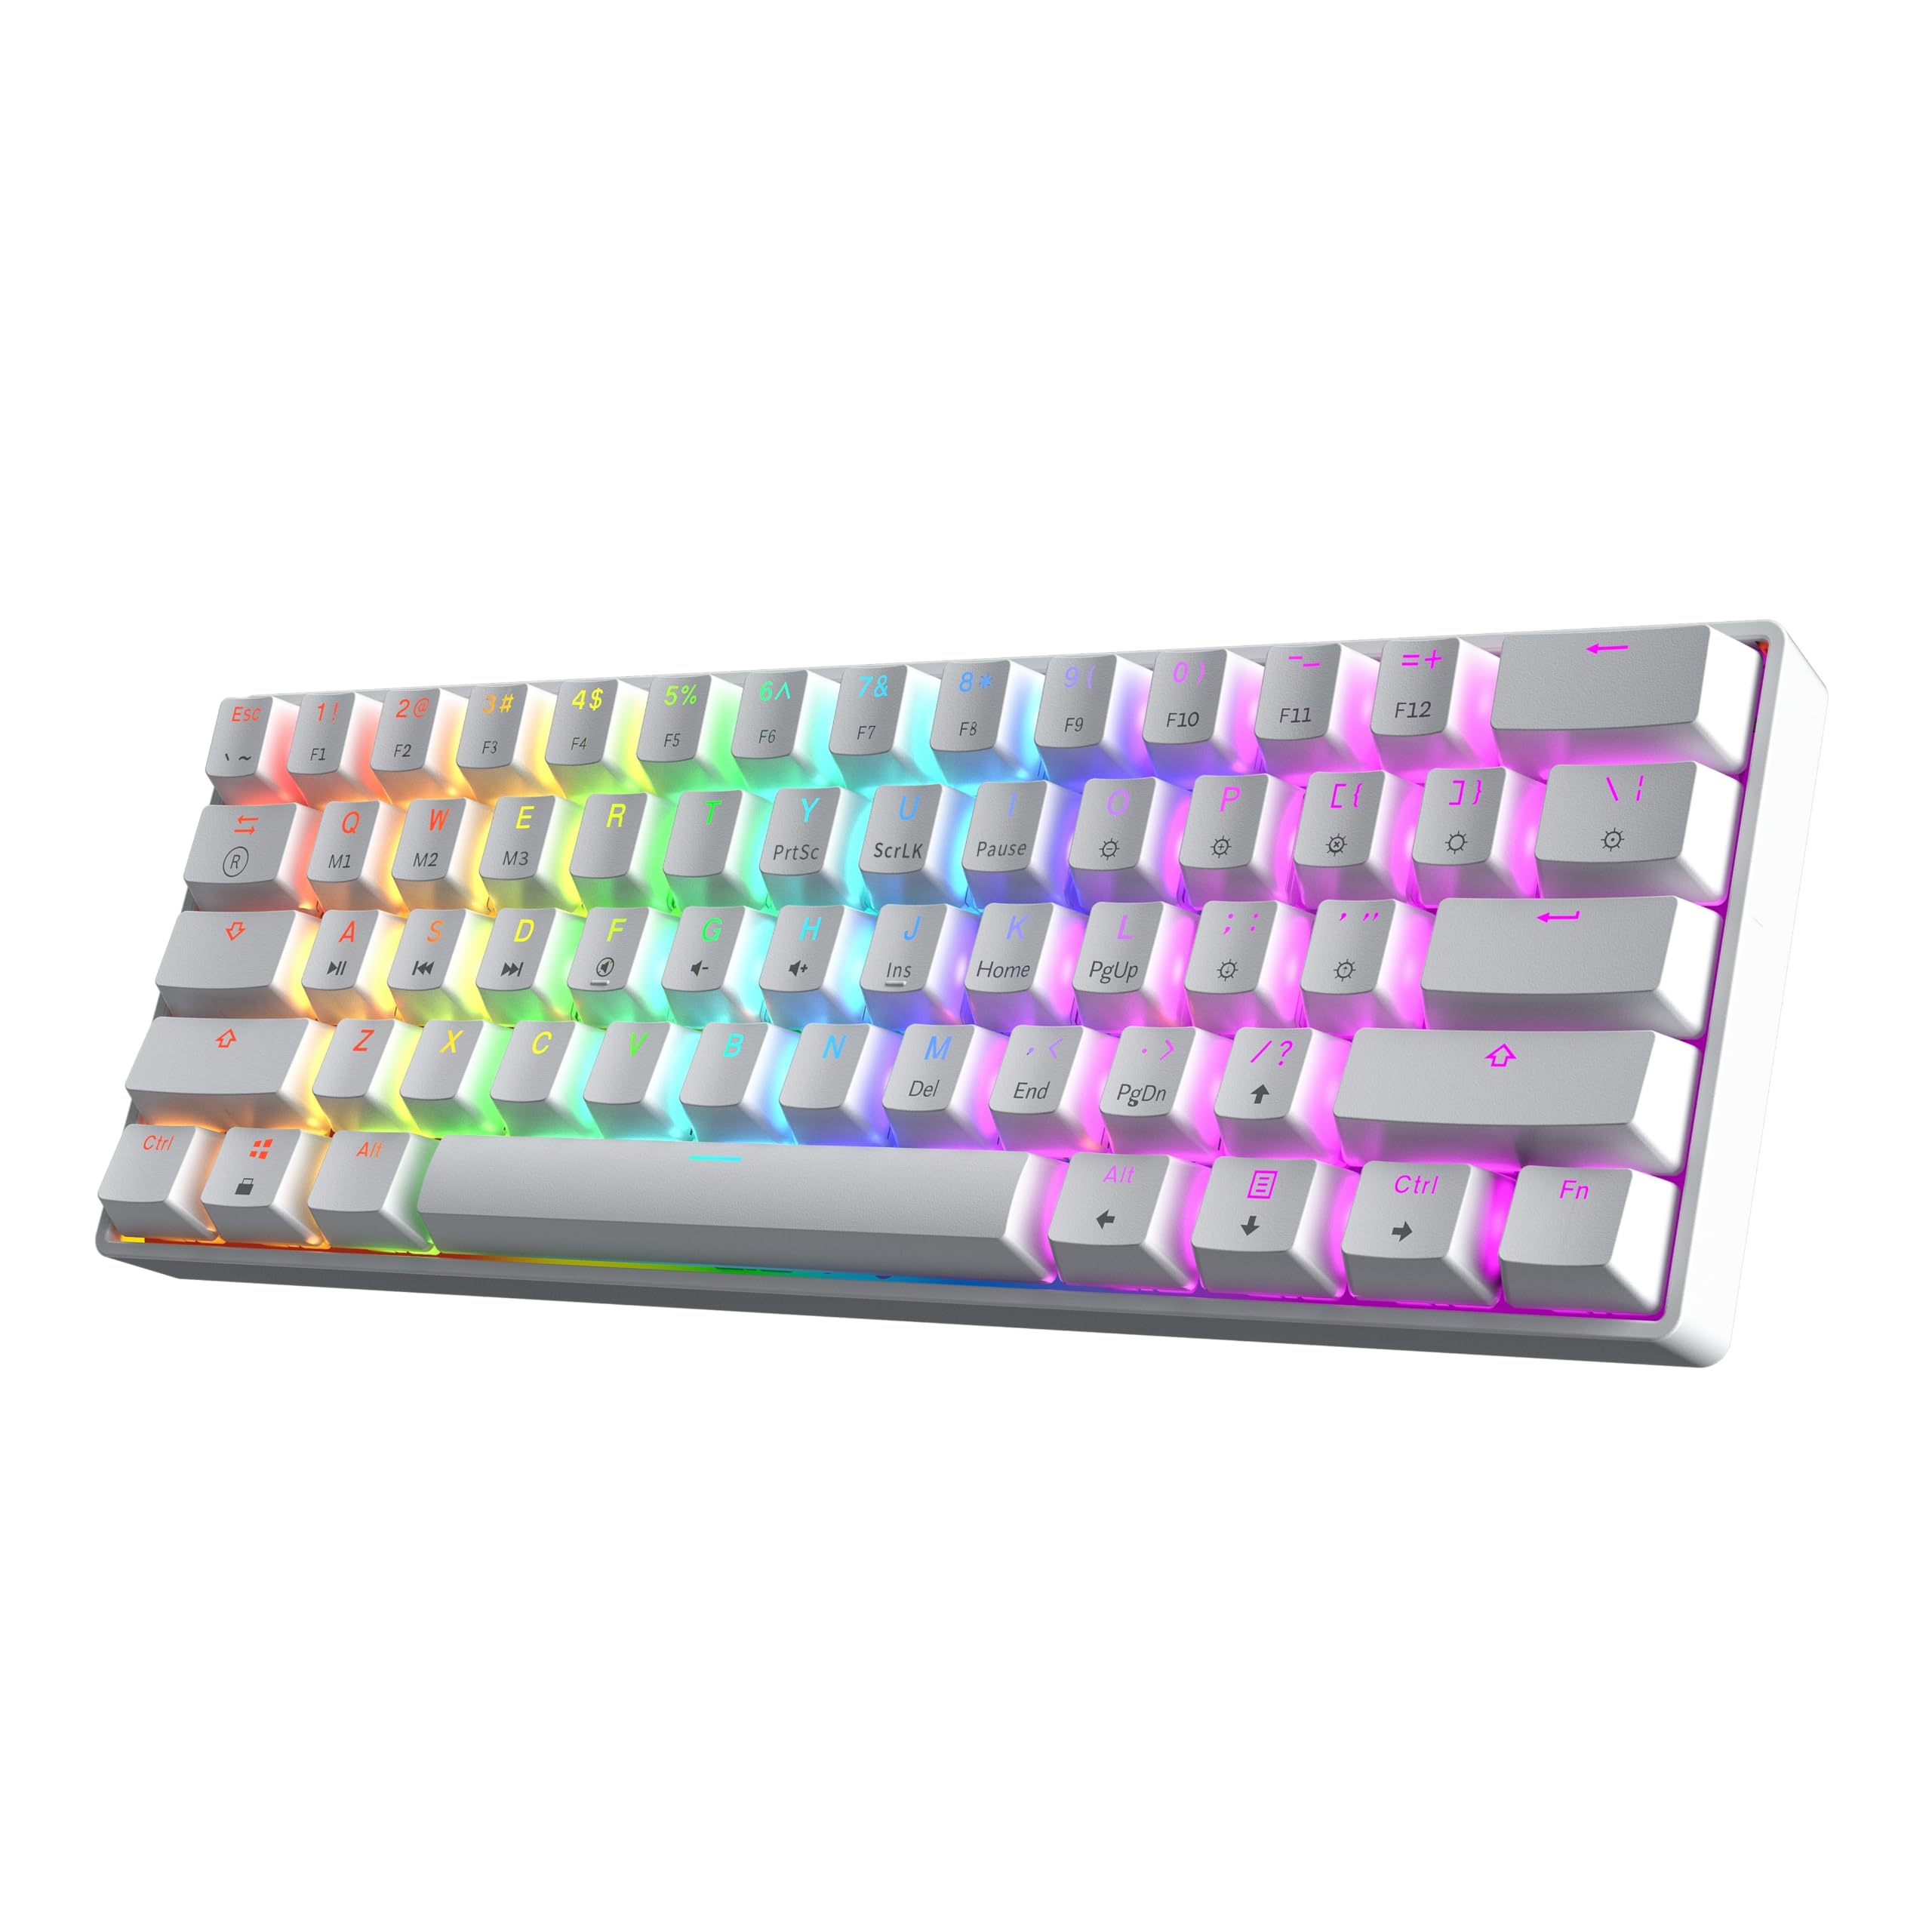 How to Change Gk61 Colors